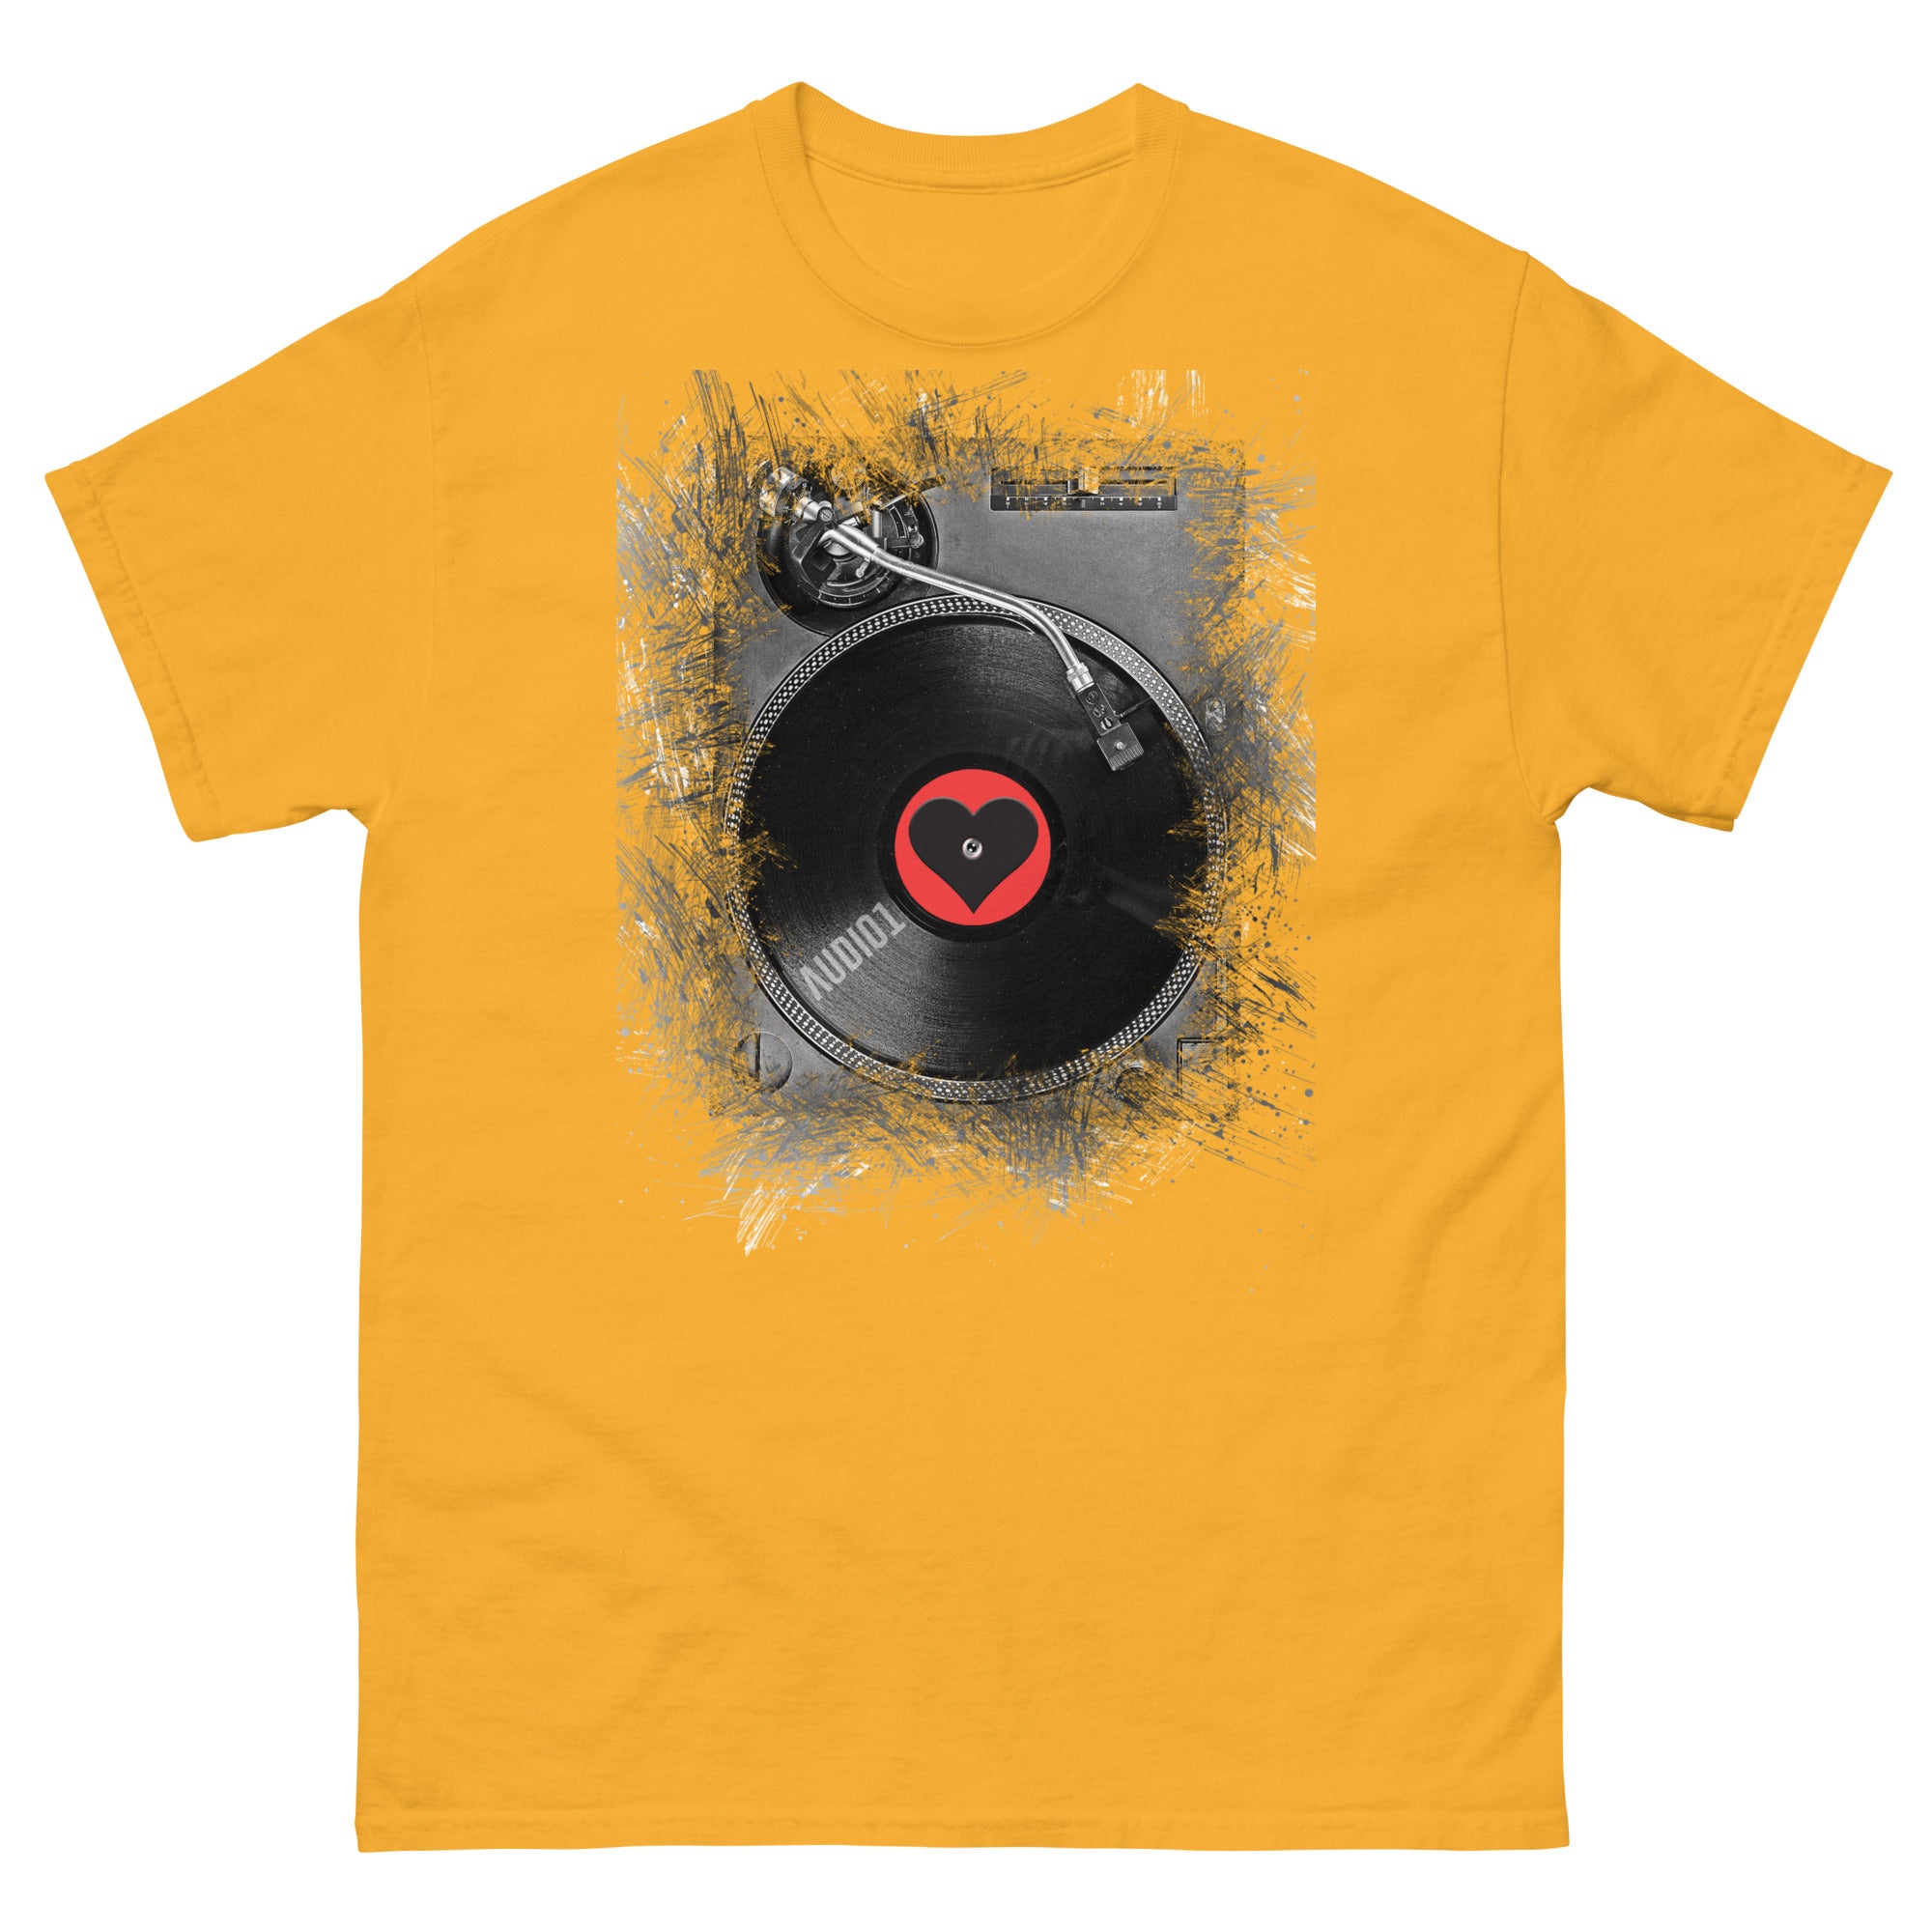 TURNTABLE IN THE HEART - Men's T-Shirt